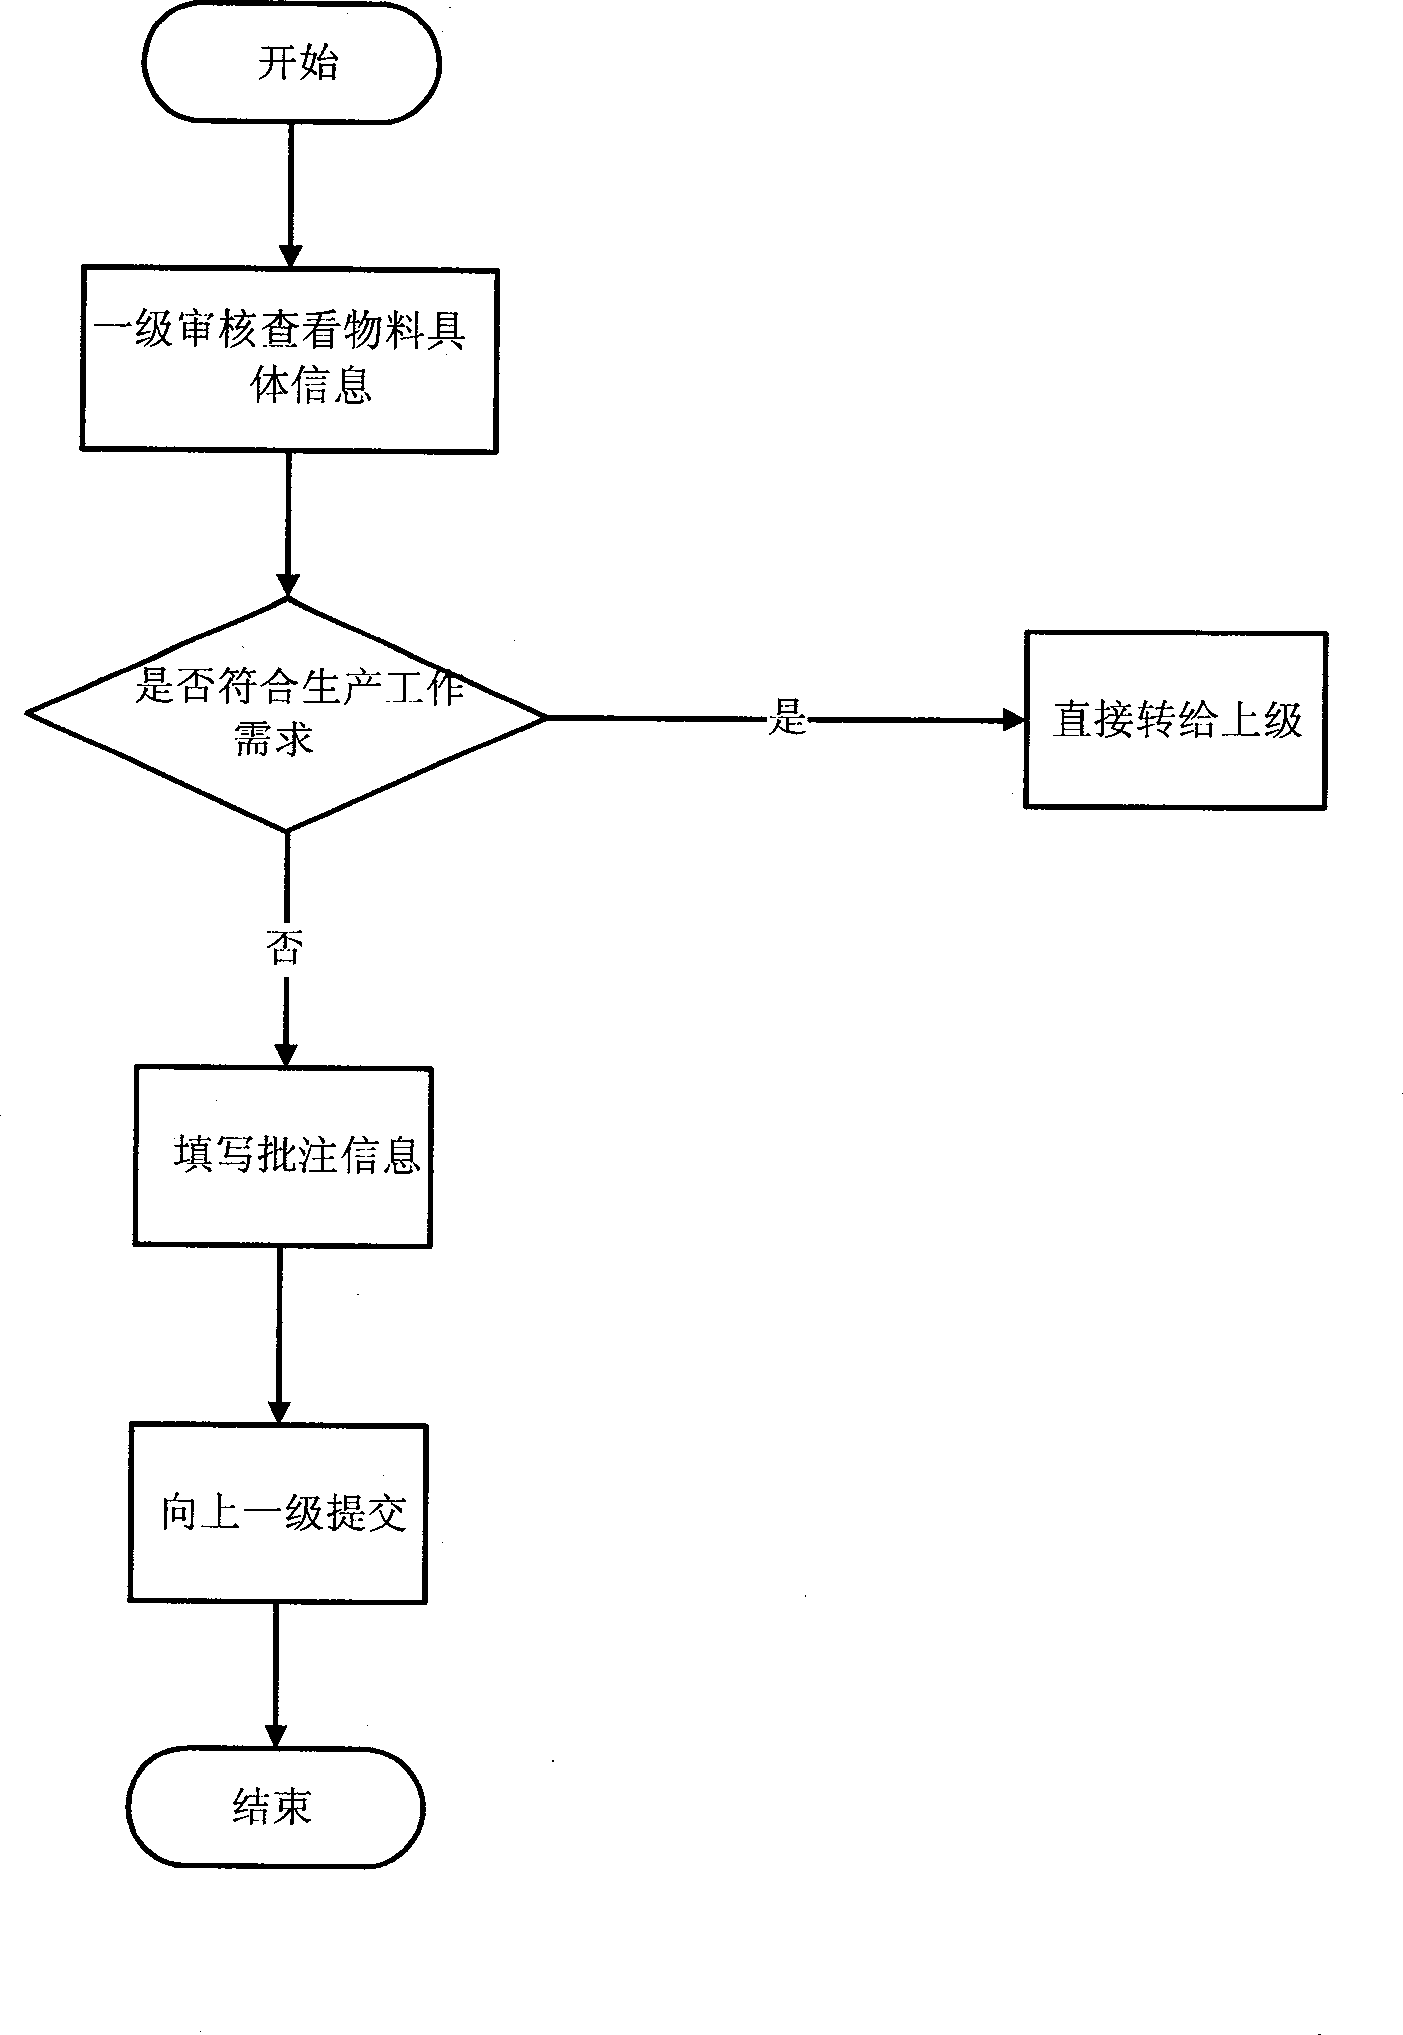 Management method and system for material encode